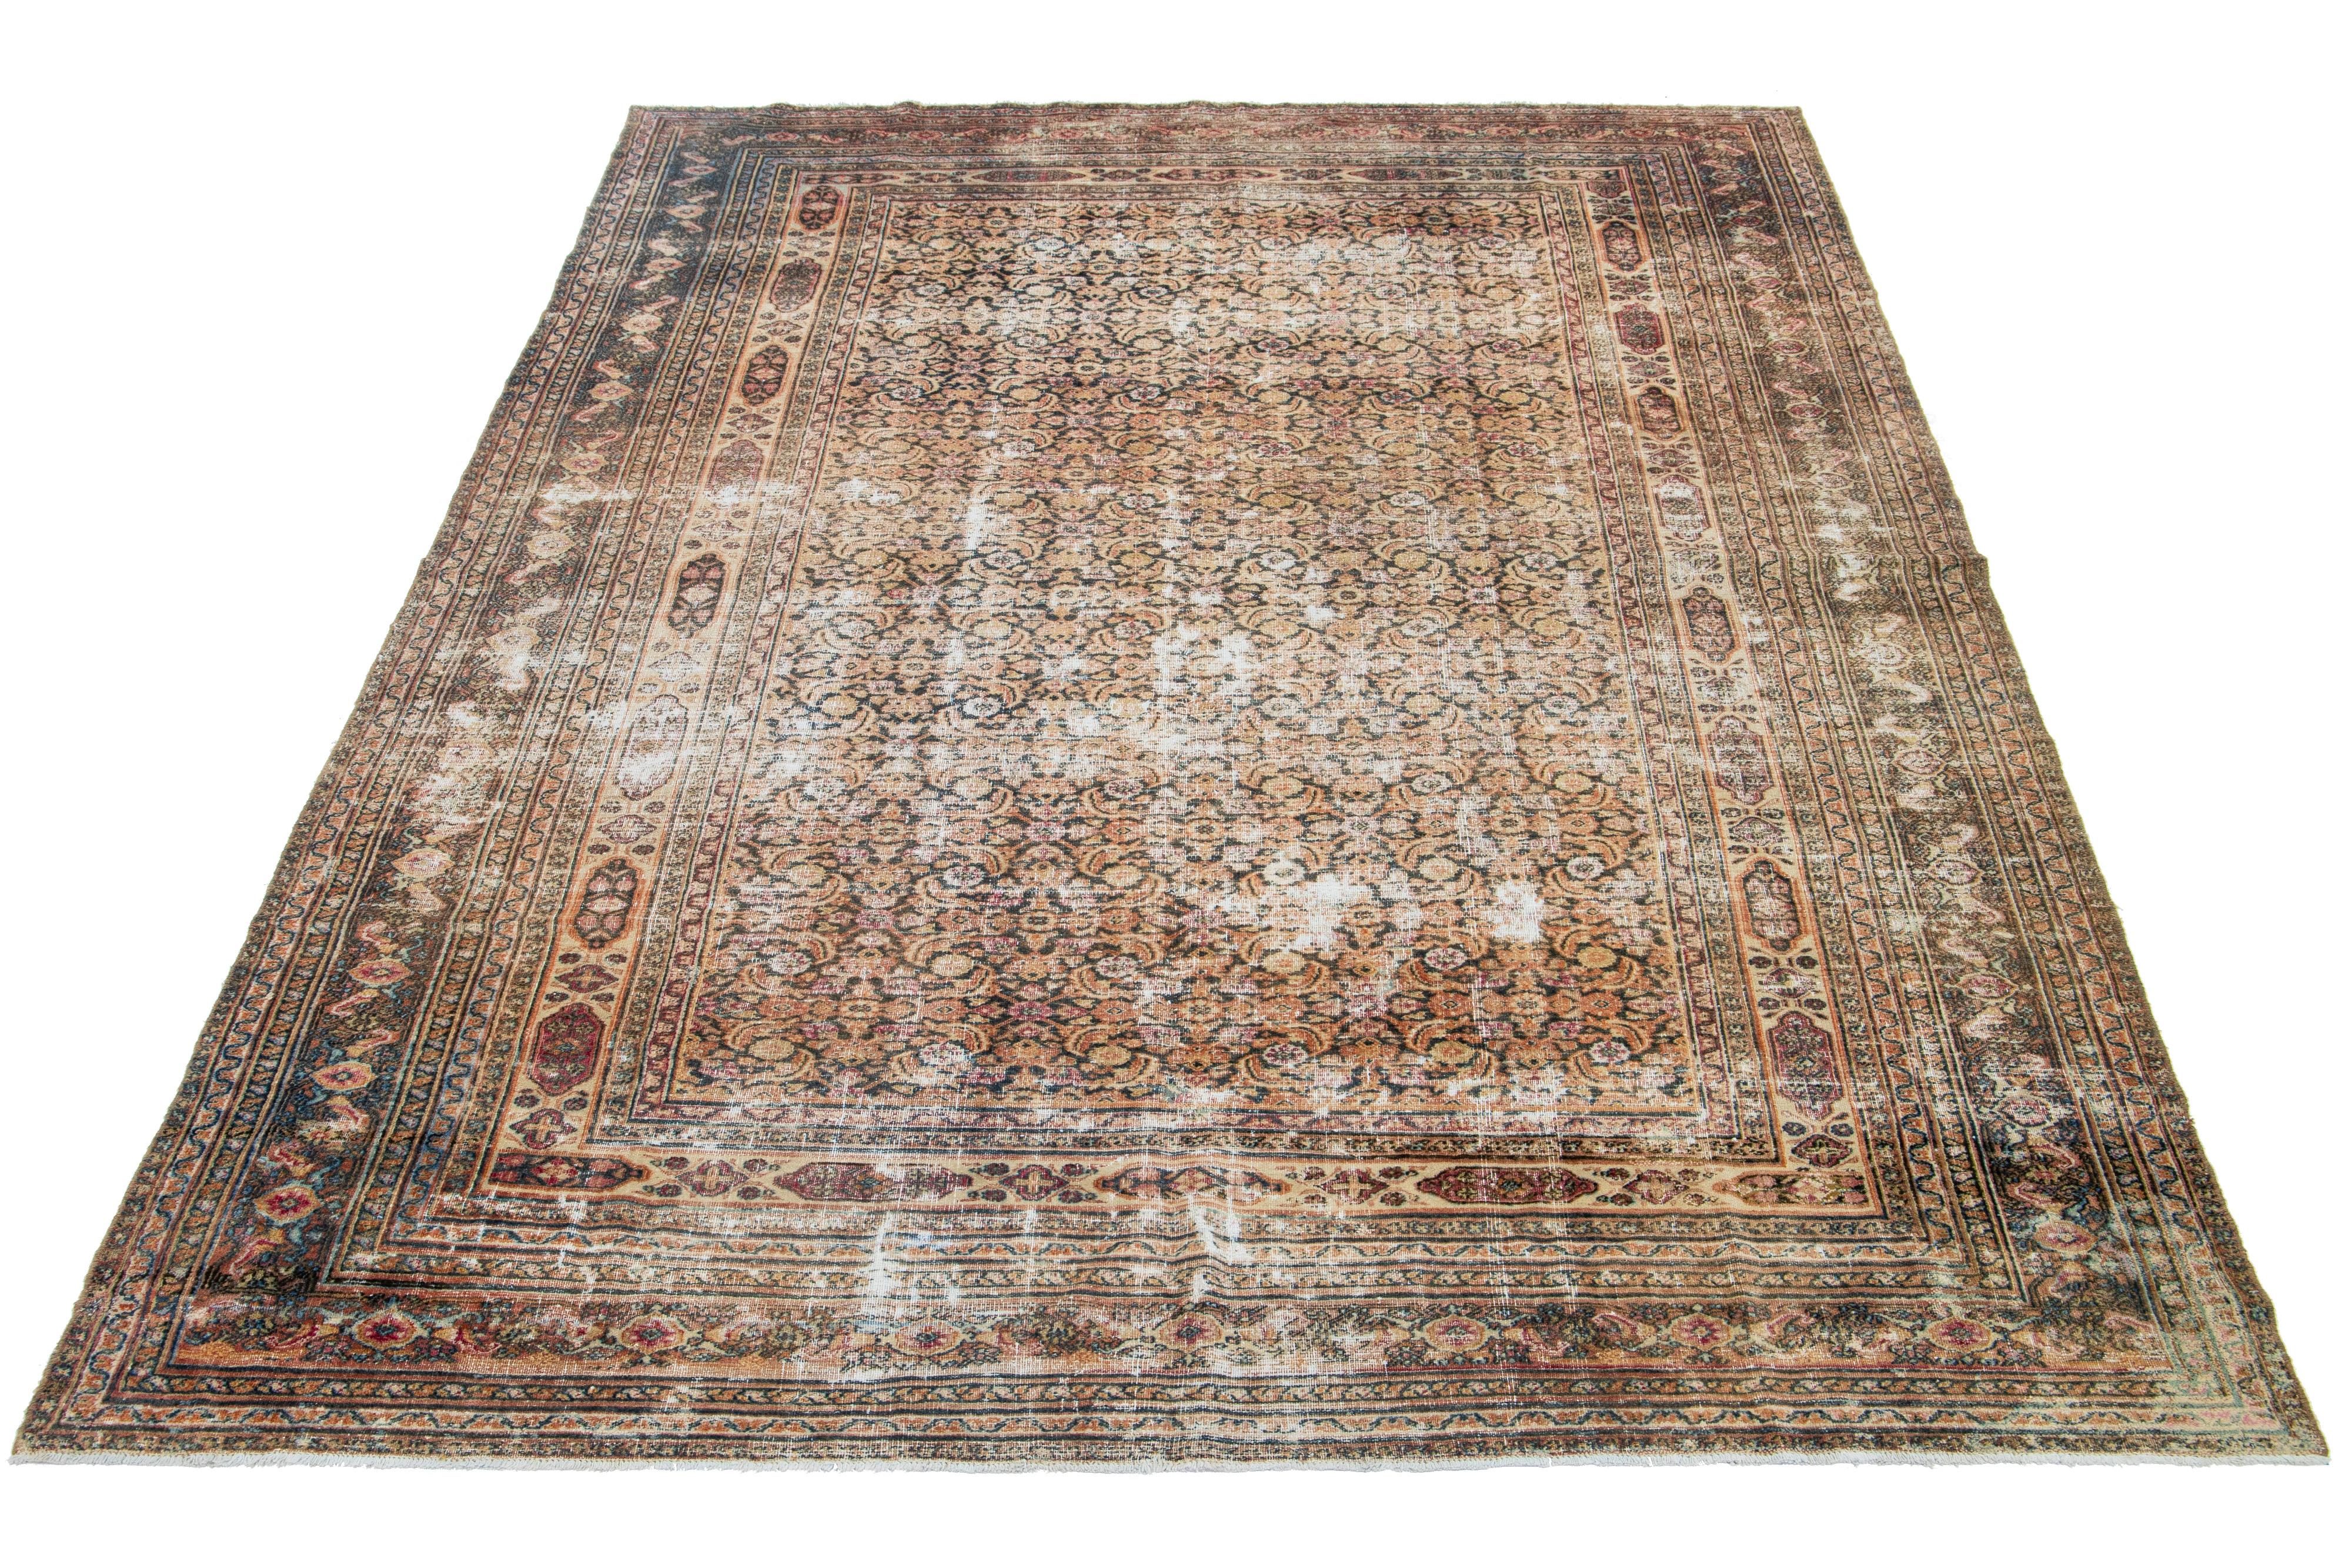 A Persian Tabriz wool rug showcases a meticulously crafted, timeless floral pattern. The design is elevated through the use of contrasting colors such as rust, brown, red, and blue within the field.

This rug measures 7'2